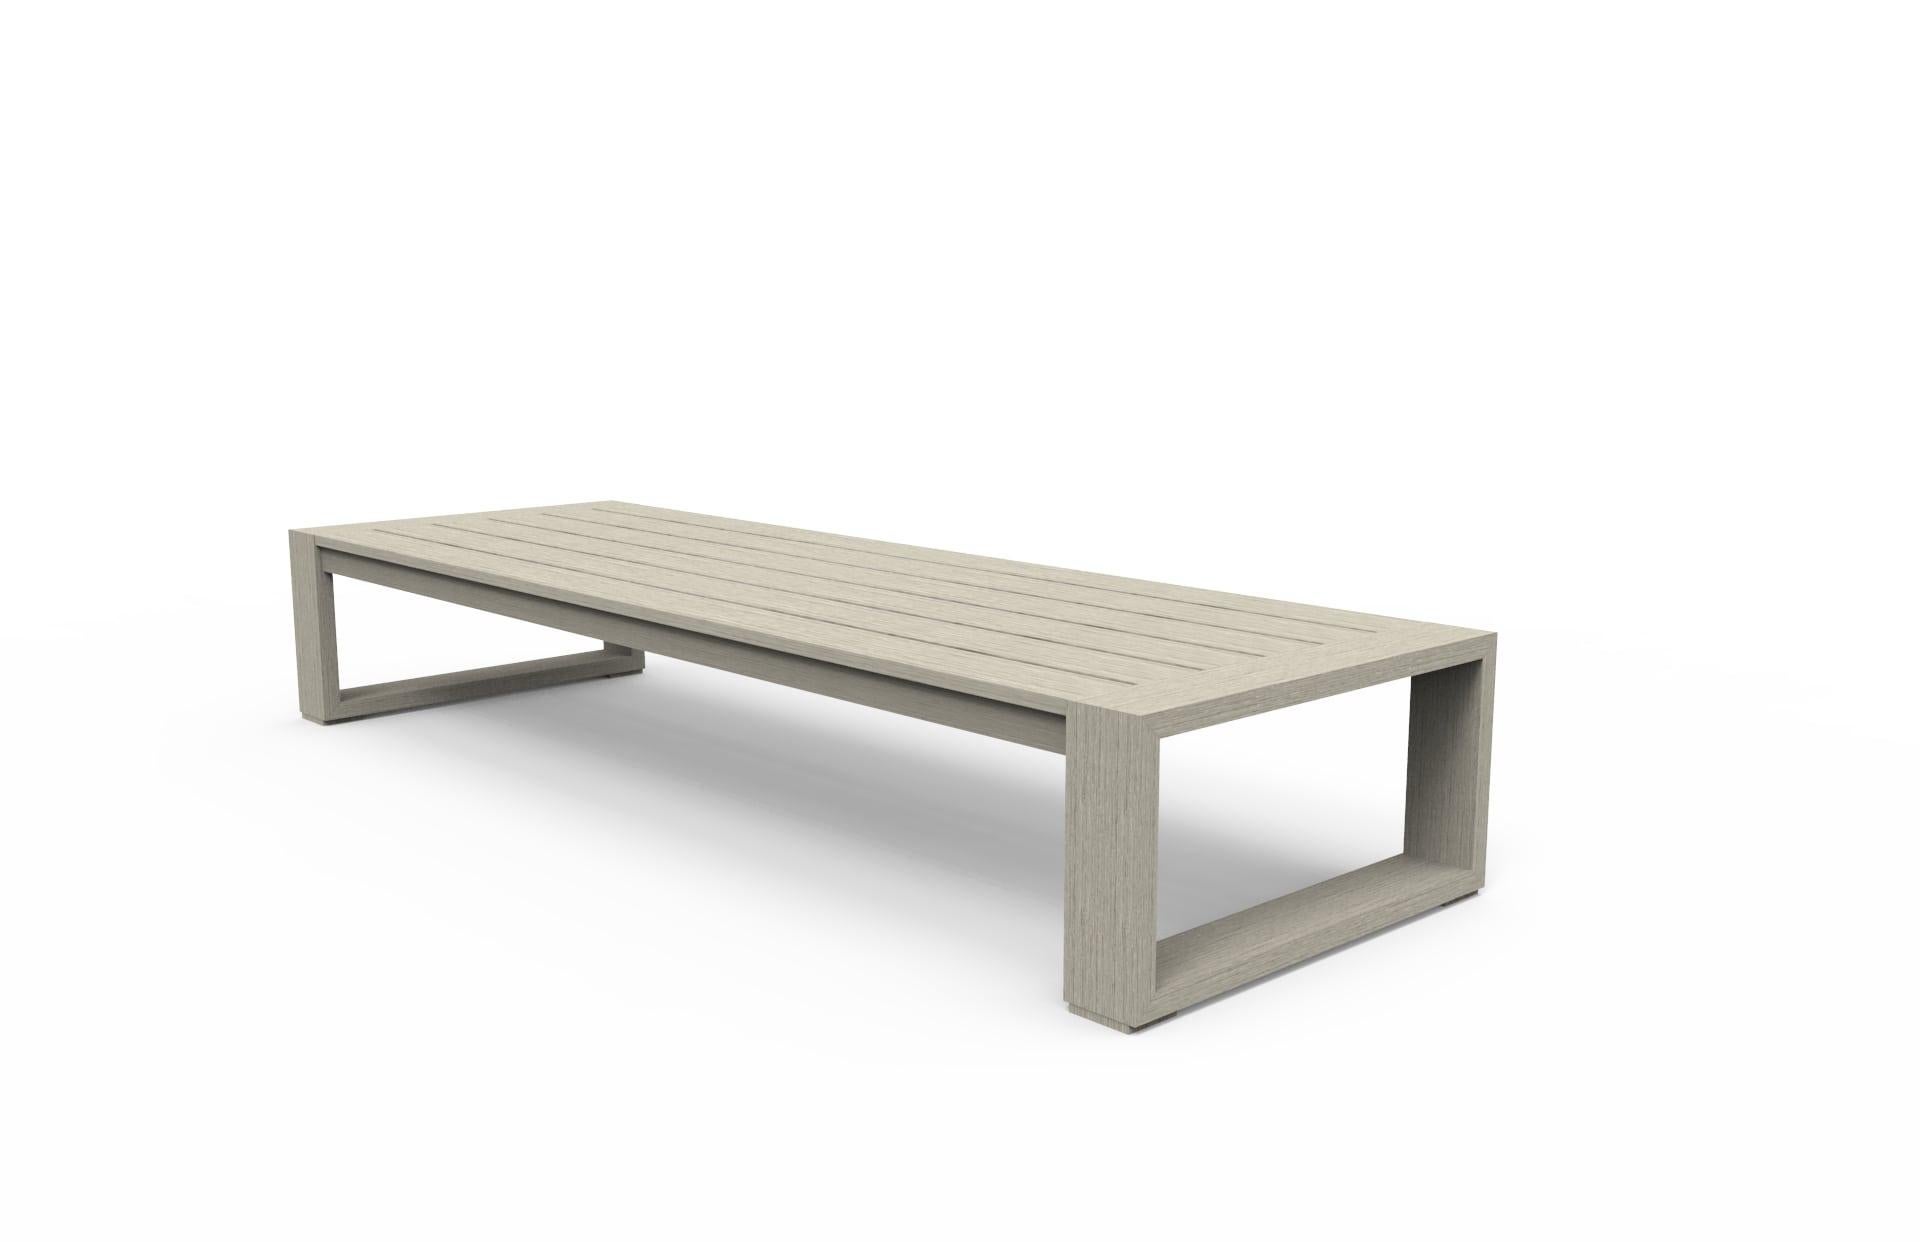 With it’s simple design, the Brixton coffee table’s wide base and solid construction makes this a remarkable design for years to come. All CAVAN furniture is made by hand, upon order, with Grade-A teak wood. Dimensions & finishes are customizable